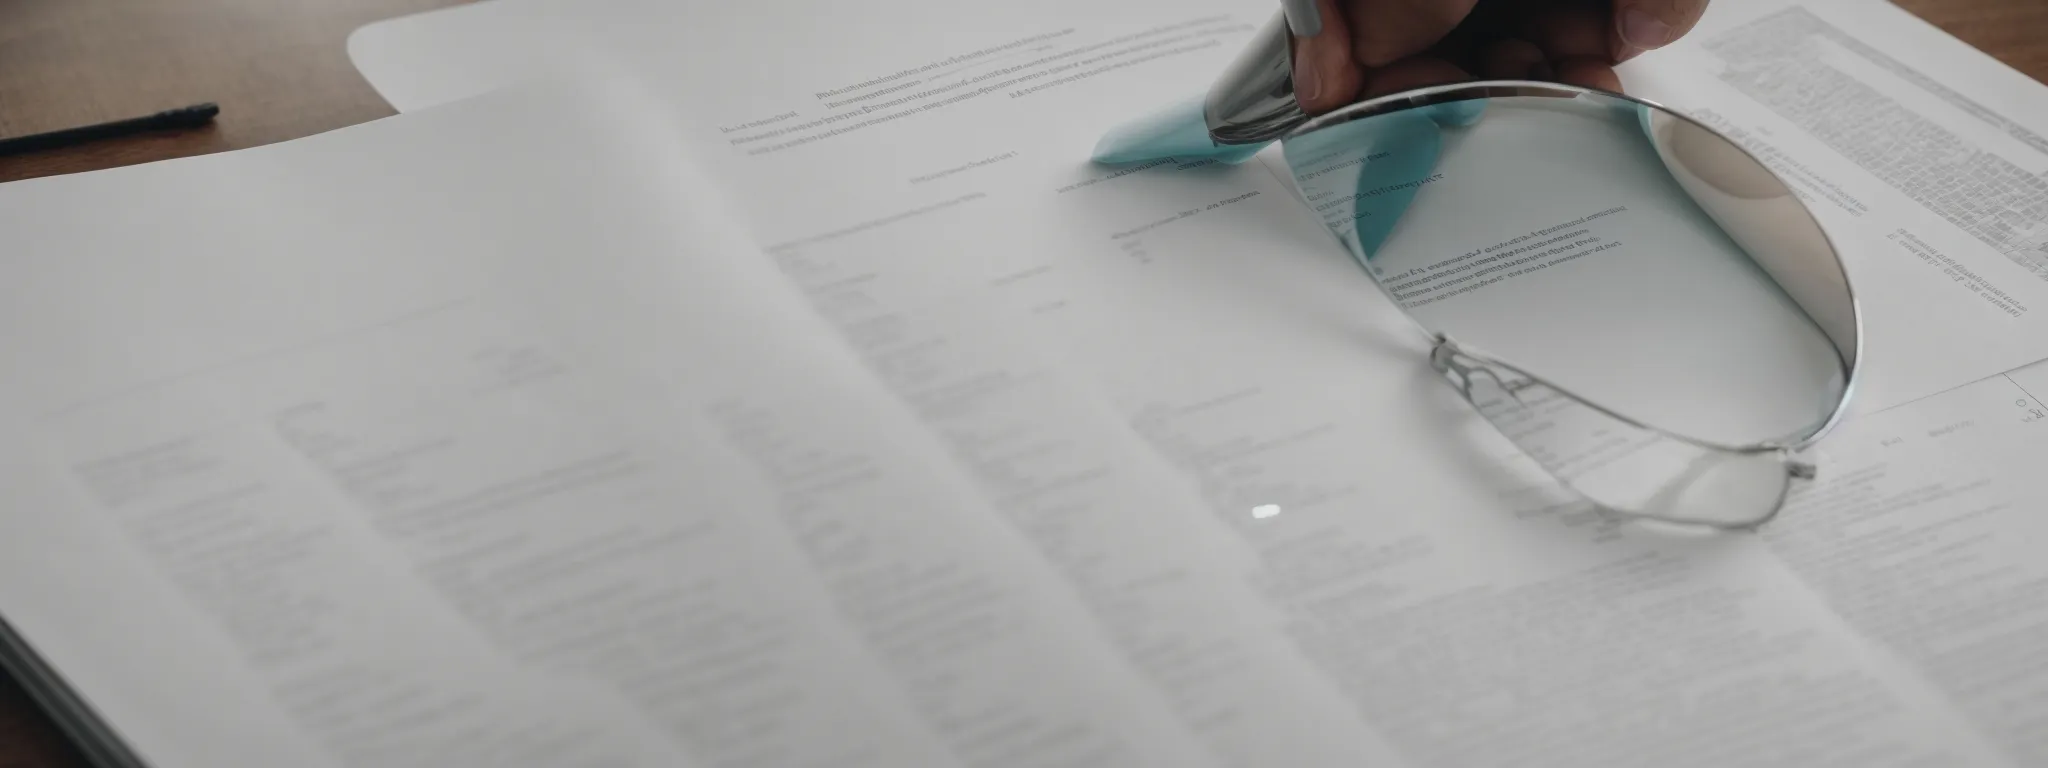 a marketer places a magnifying glass over a strategic content planning document to signify the focus on semantic seo.